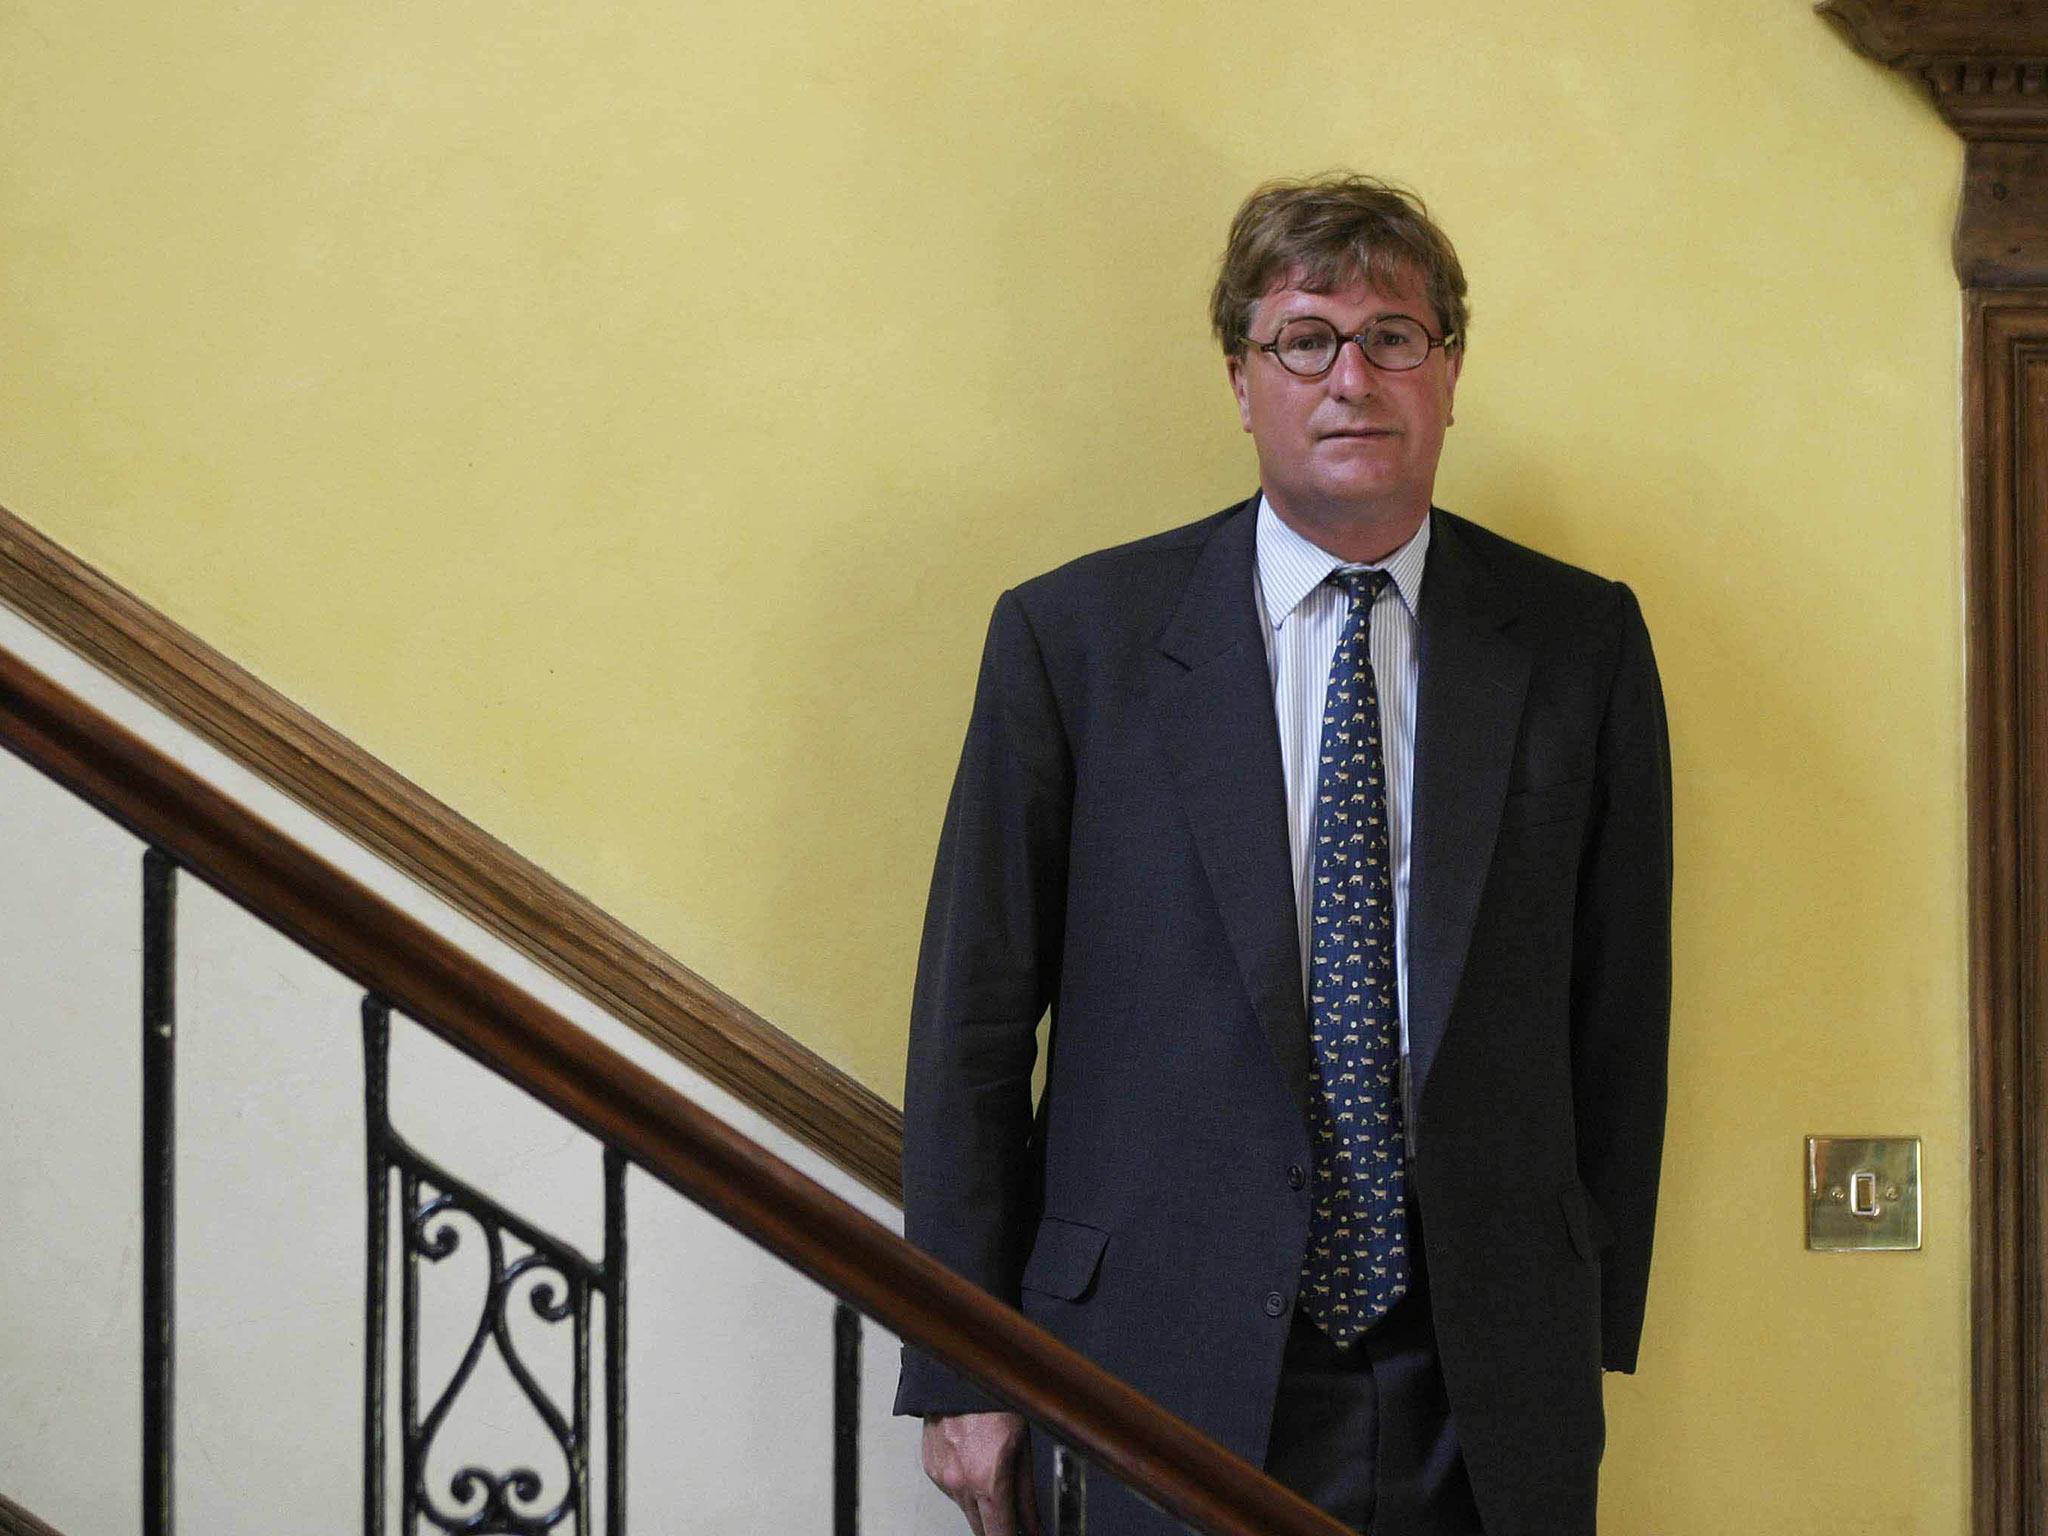 Crispin Odey gained £220 million as a result of Britain's exit from the European Union